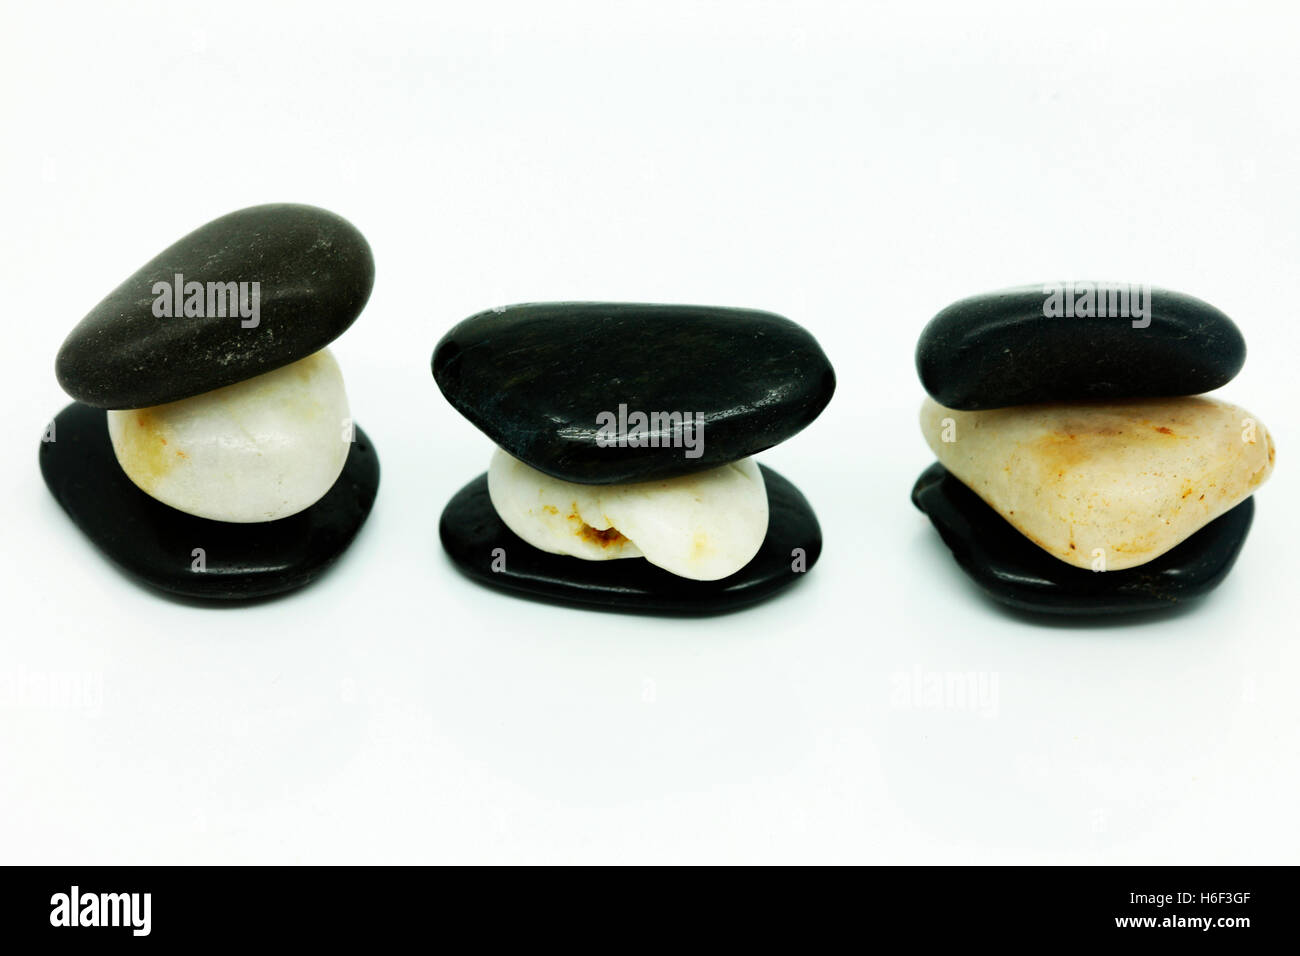 pebbles made to look like cheese burgers Jane Ann Butler Photography JABPF038 Stock Photo